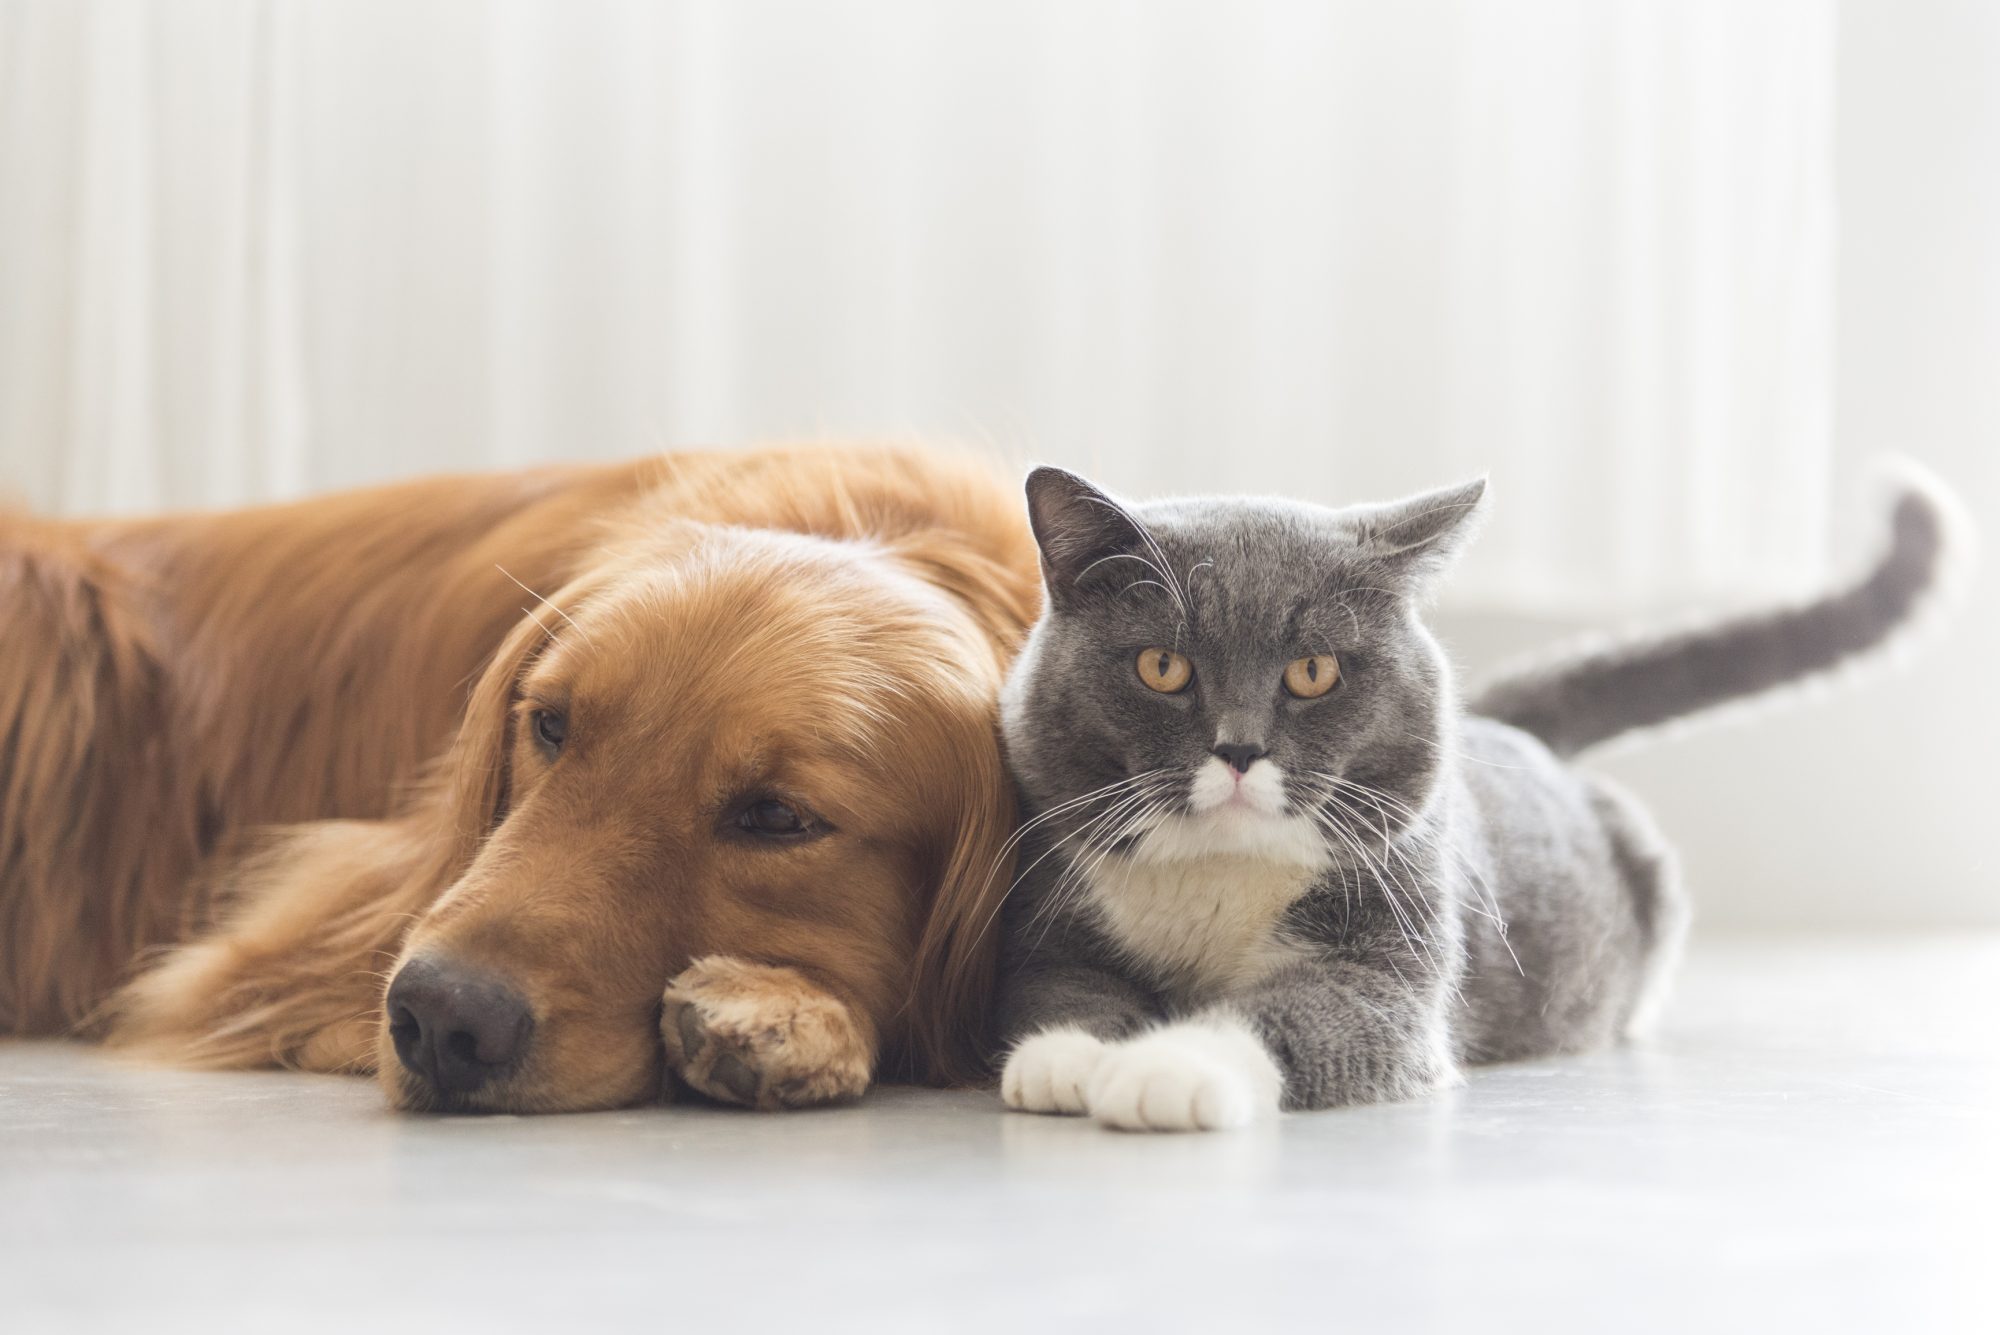 Developing therapies for cats, dogs & patients